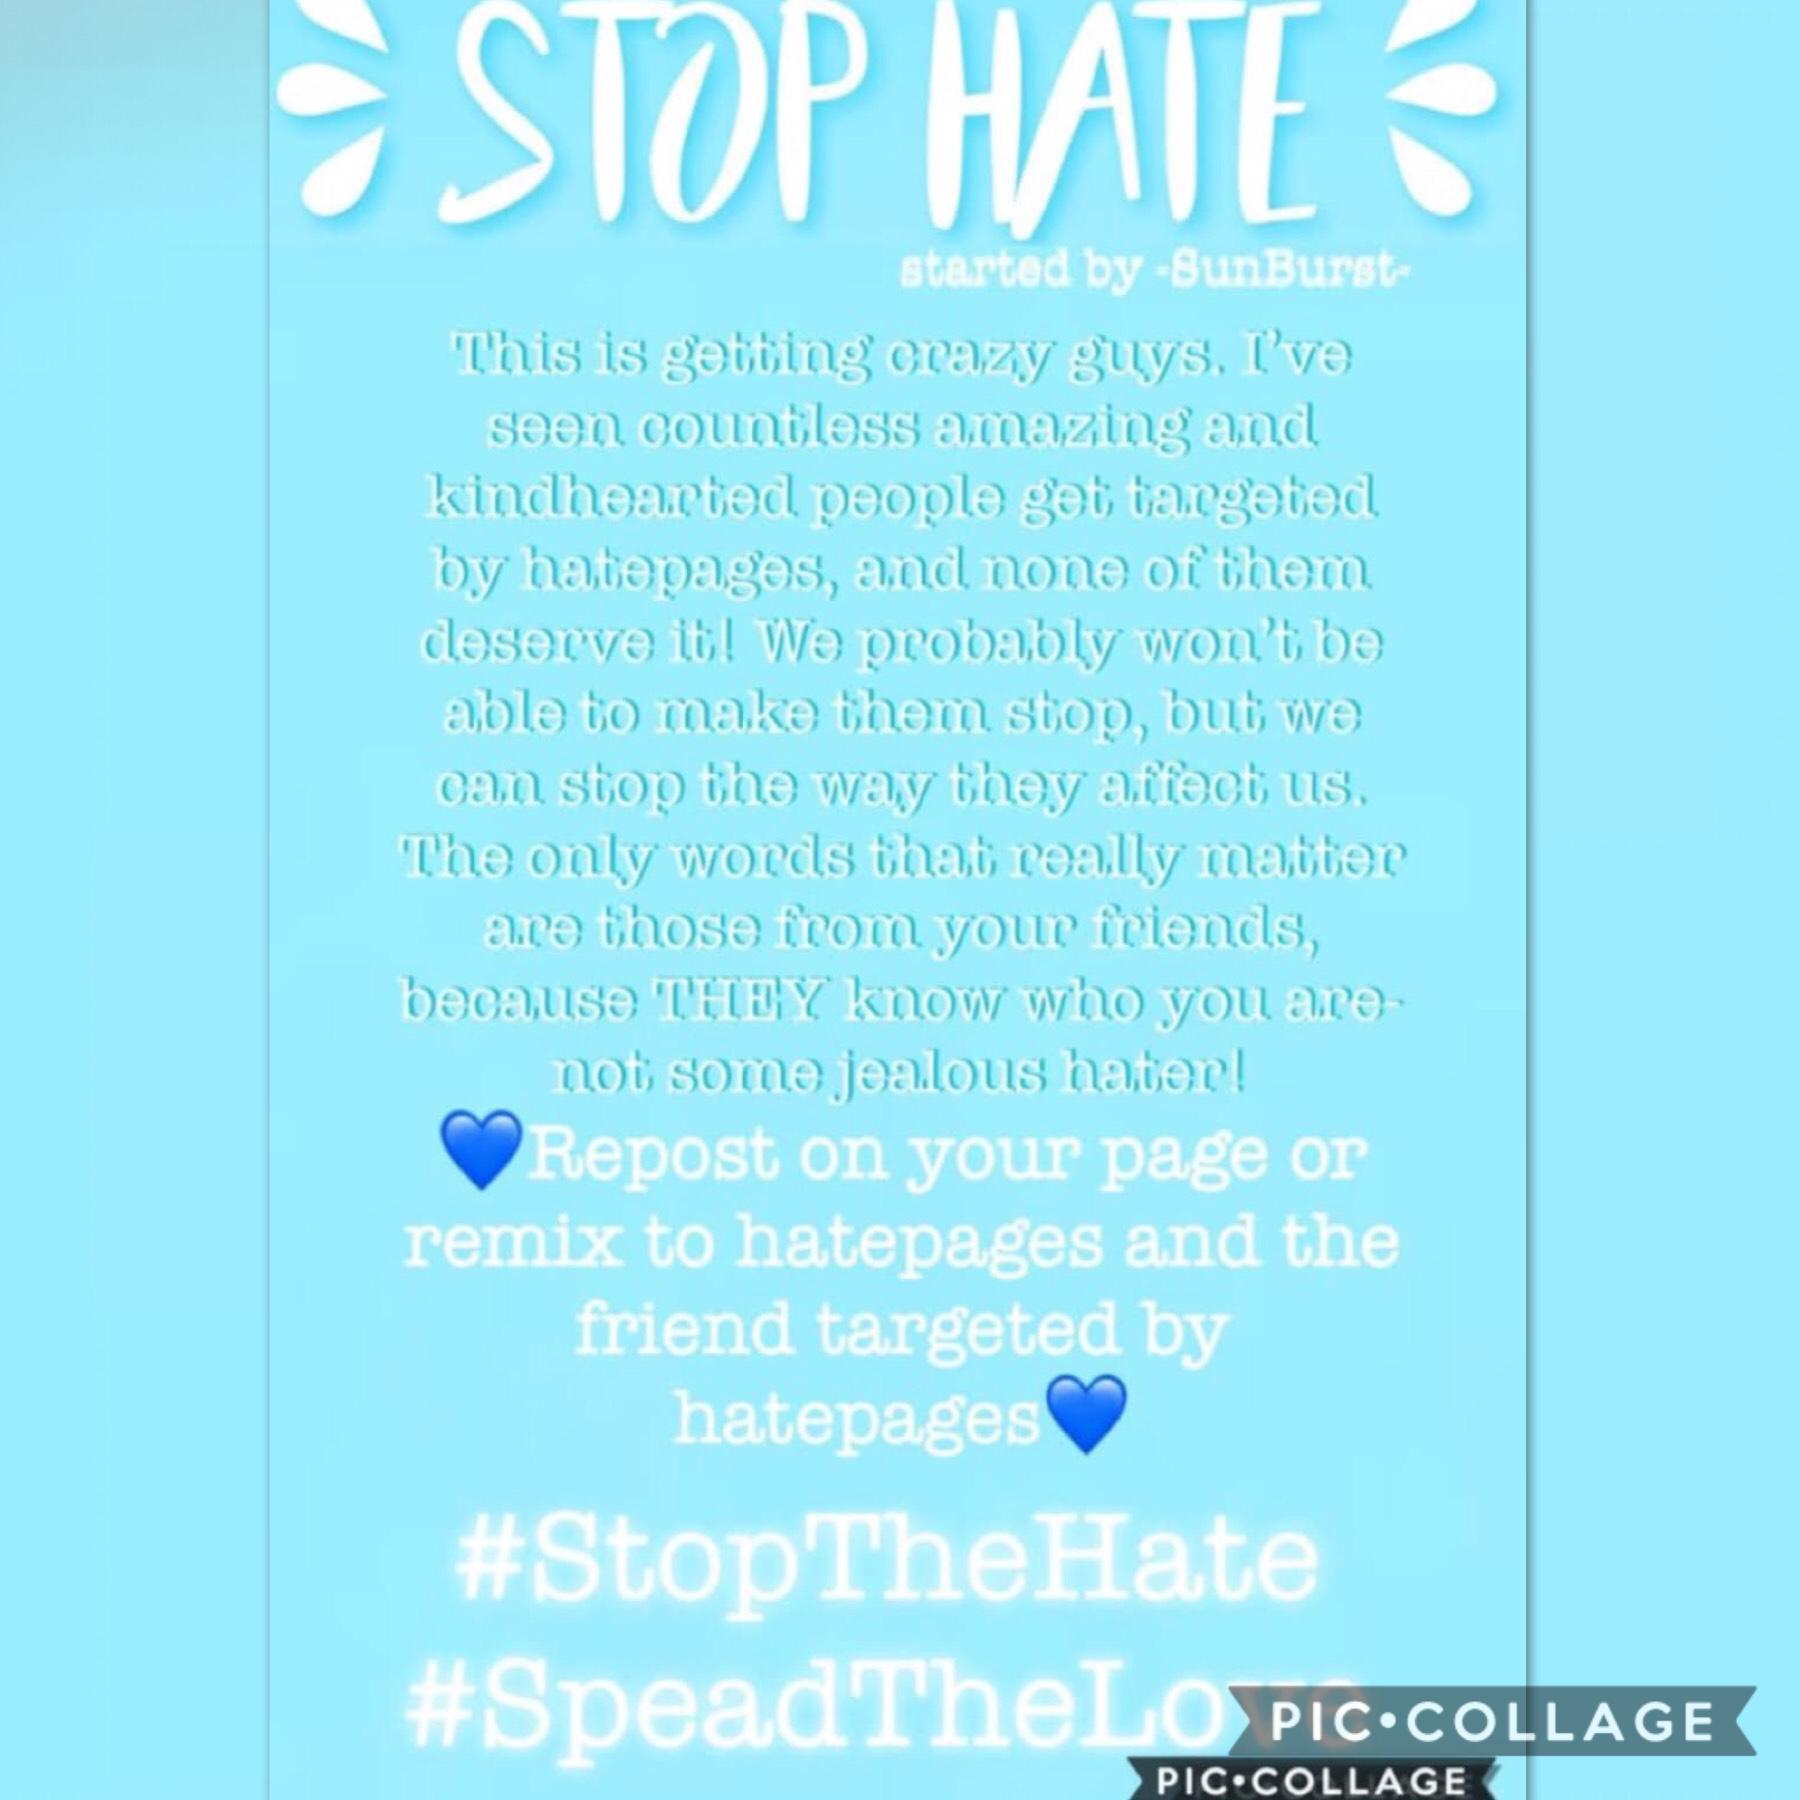 STOP THE HATE!